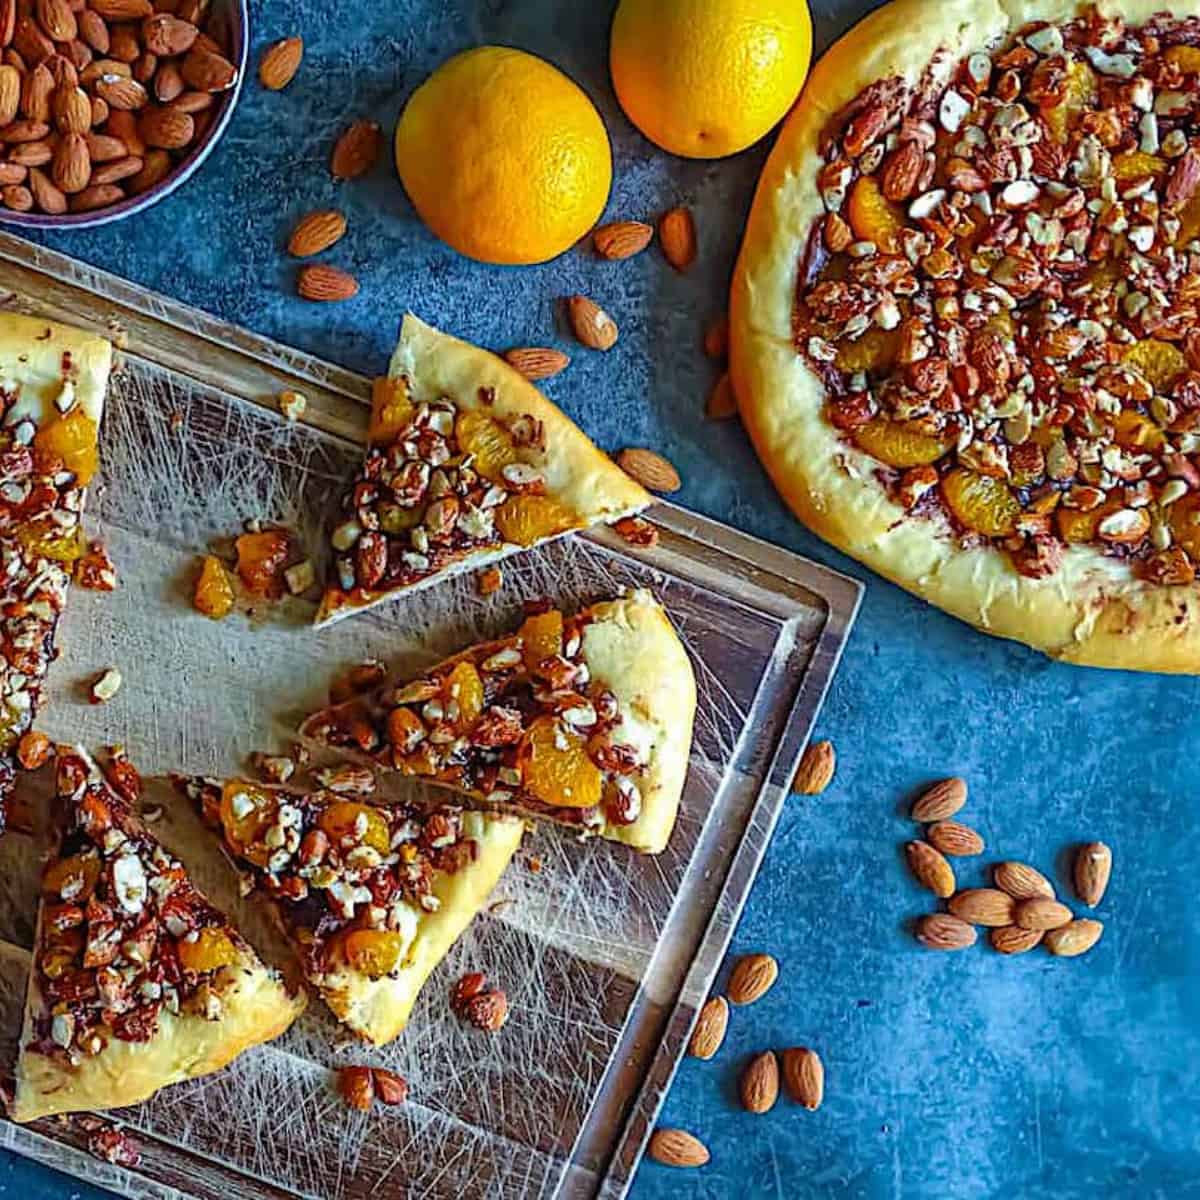 nutella dessert pizza with oranges and almonds on a cutting board